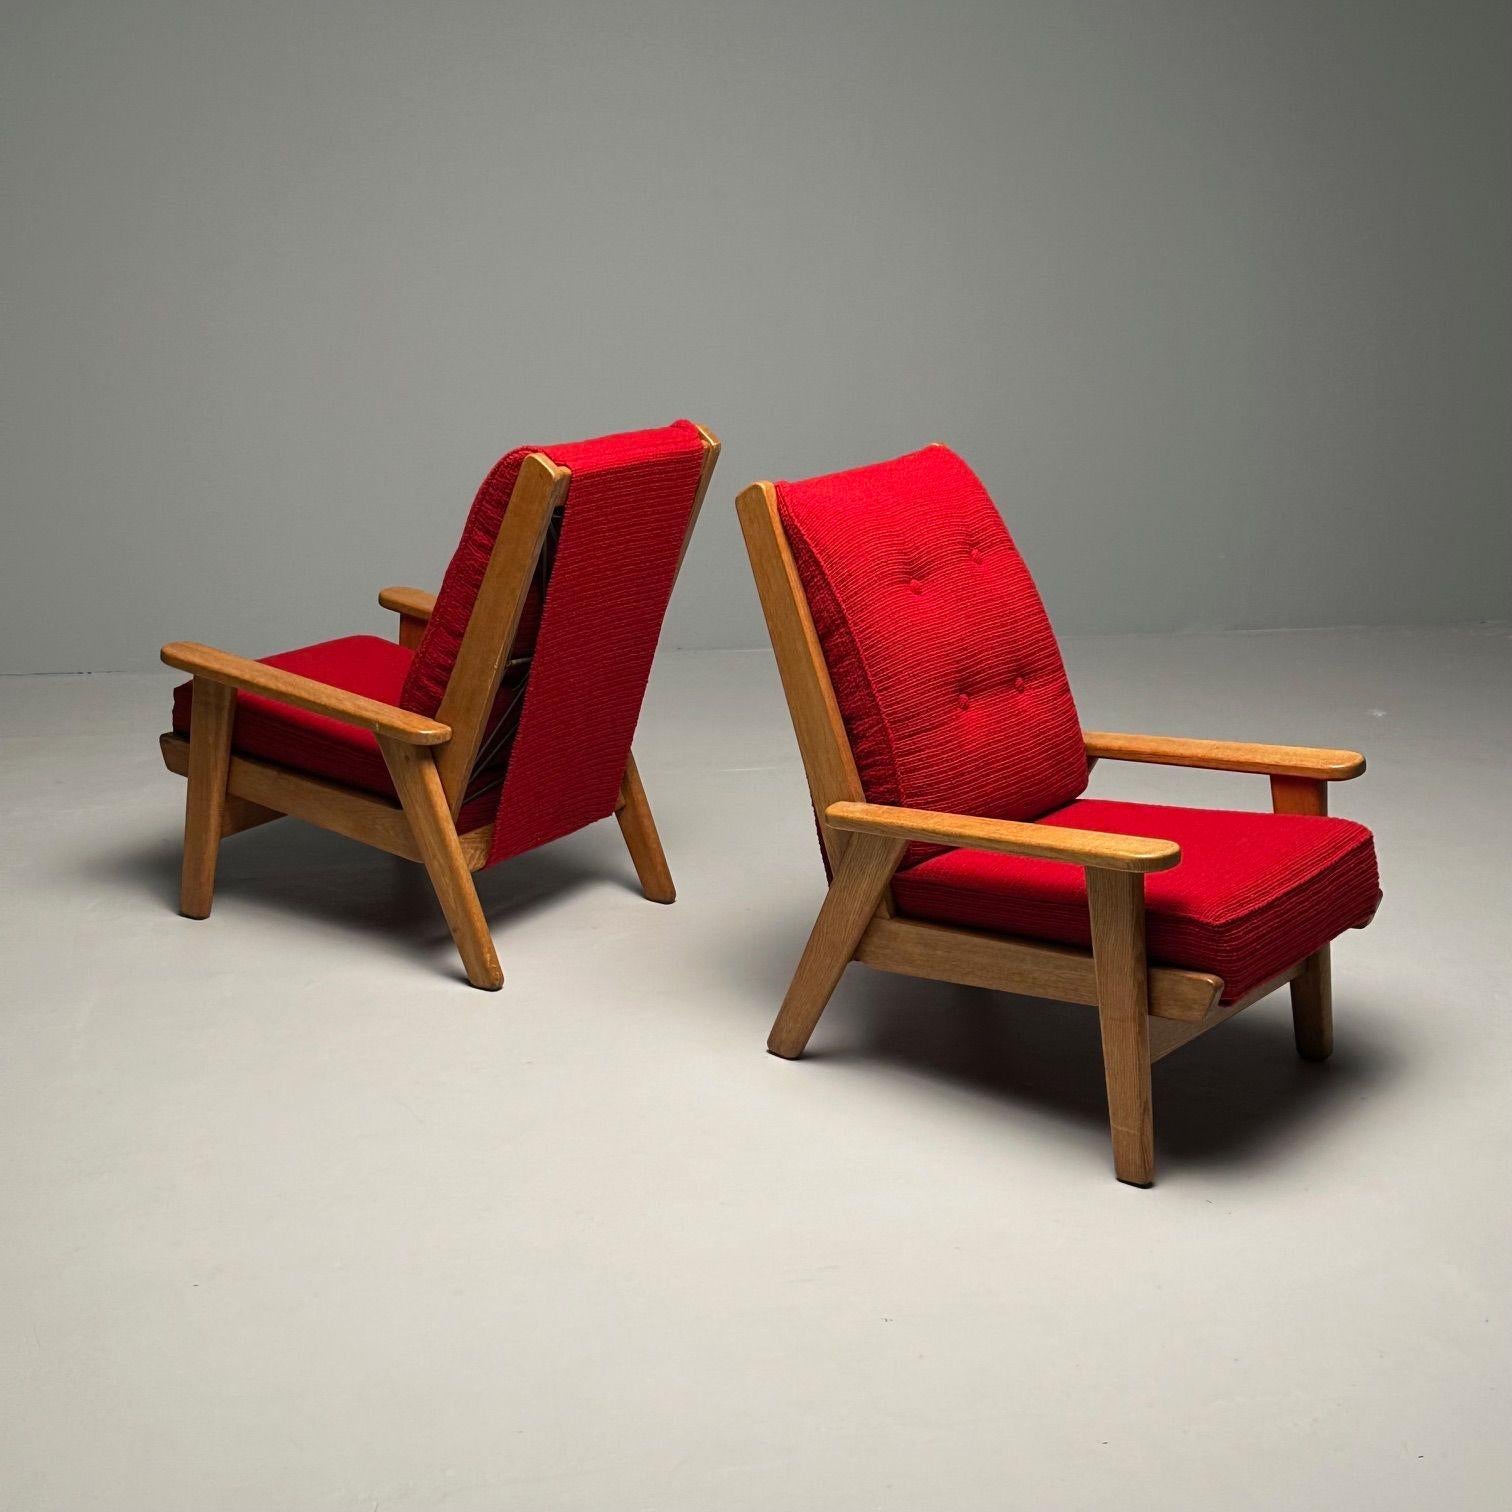 Pair French Mid-Century Modern Pierre Guariche Lounge / Arm Chairs France Export

French modern lounge chairs designed by Pierre Guariche for Free-Span, France, circa 1960s. The Free-Span manufacturer had high-profile French designers produce